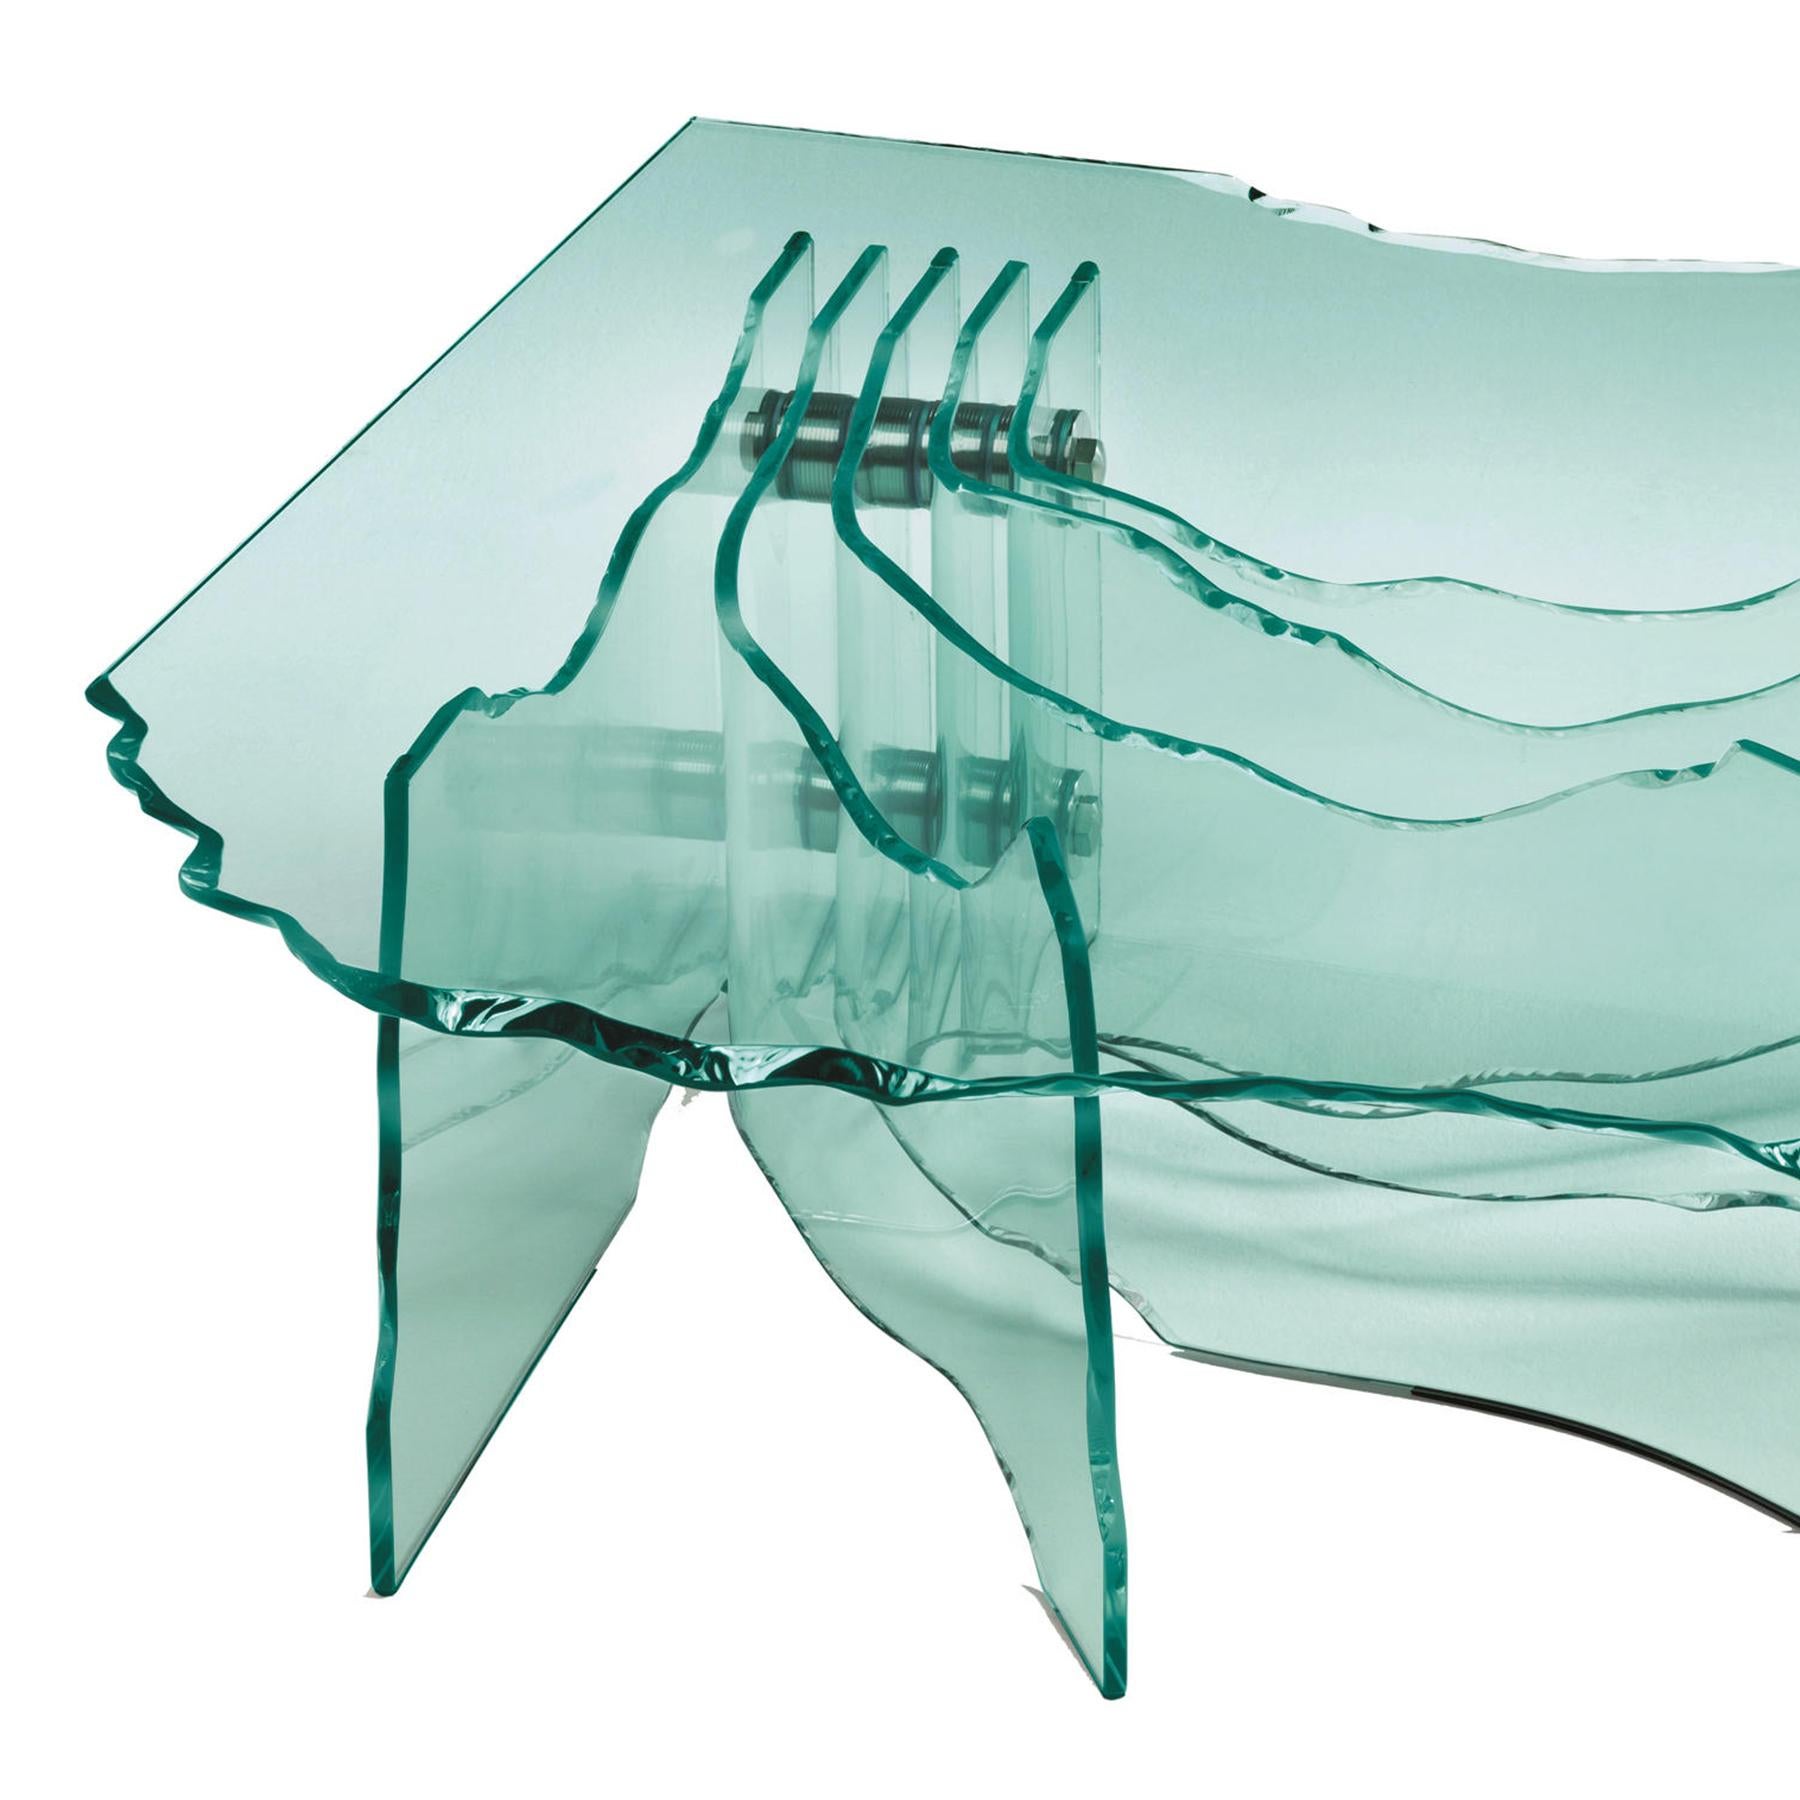 Coffee table glass sheets all in fused glass,
with fused glass top, 15mm thickness, hand-carved 
glass top with bevelled edge. With fused glass base,
12mm thickness, like glass sheets jointed with stainless
steel parts.